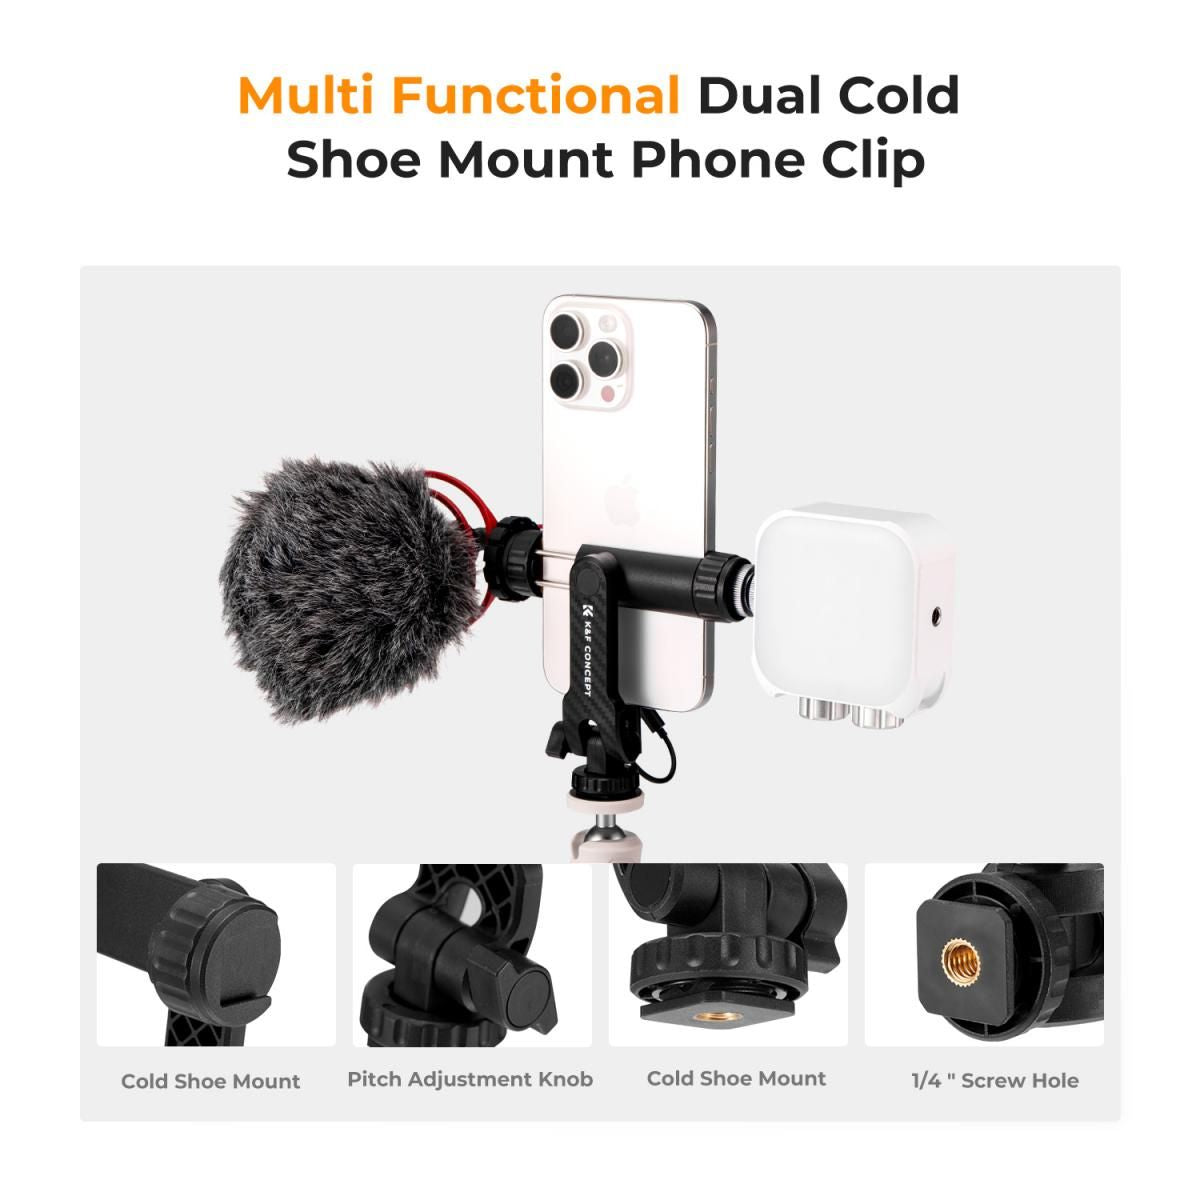 K&F Concept Tripod Mount Phone Holder for iPhone & Android Smartphones with Dual Cold Shoe for LED Fill Lights, Microphones, and Camera Accessories